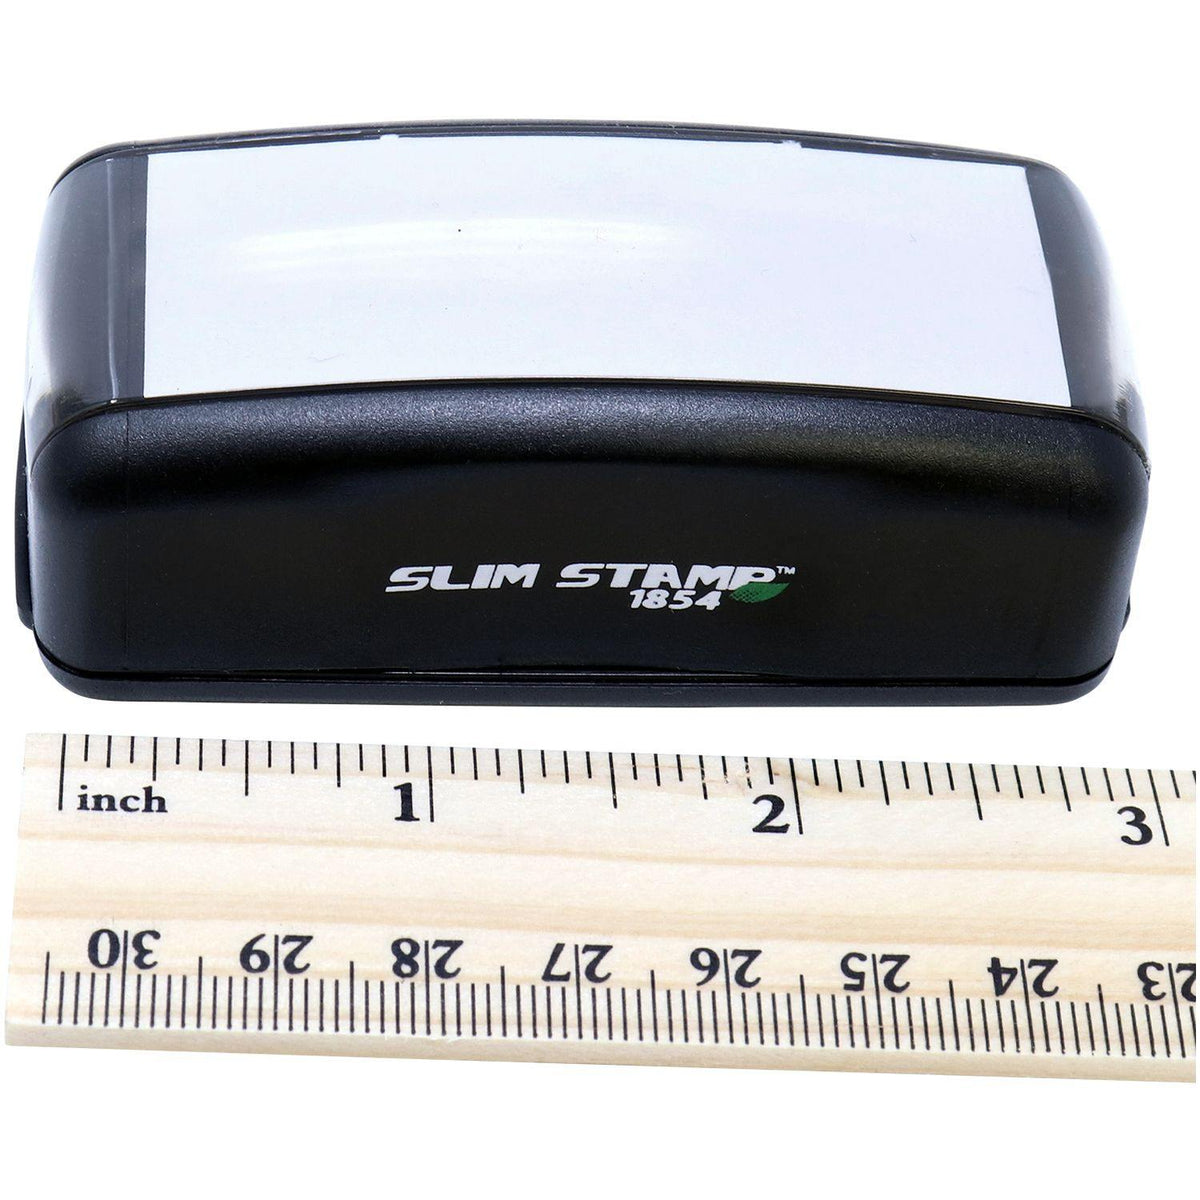 Measurement Large Pre-Inked Anulado Stamp with Ruler